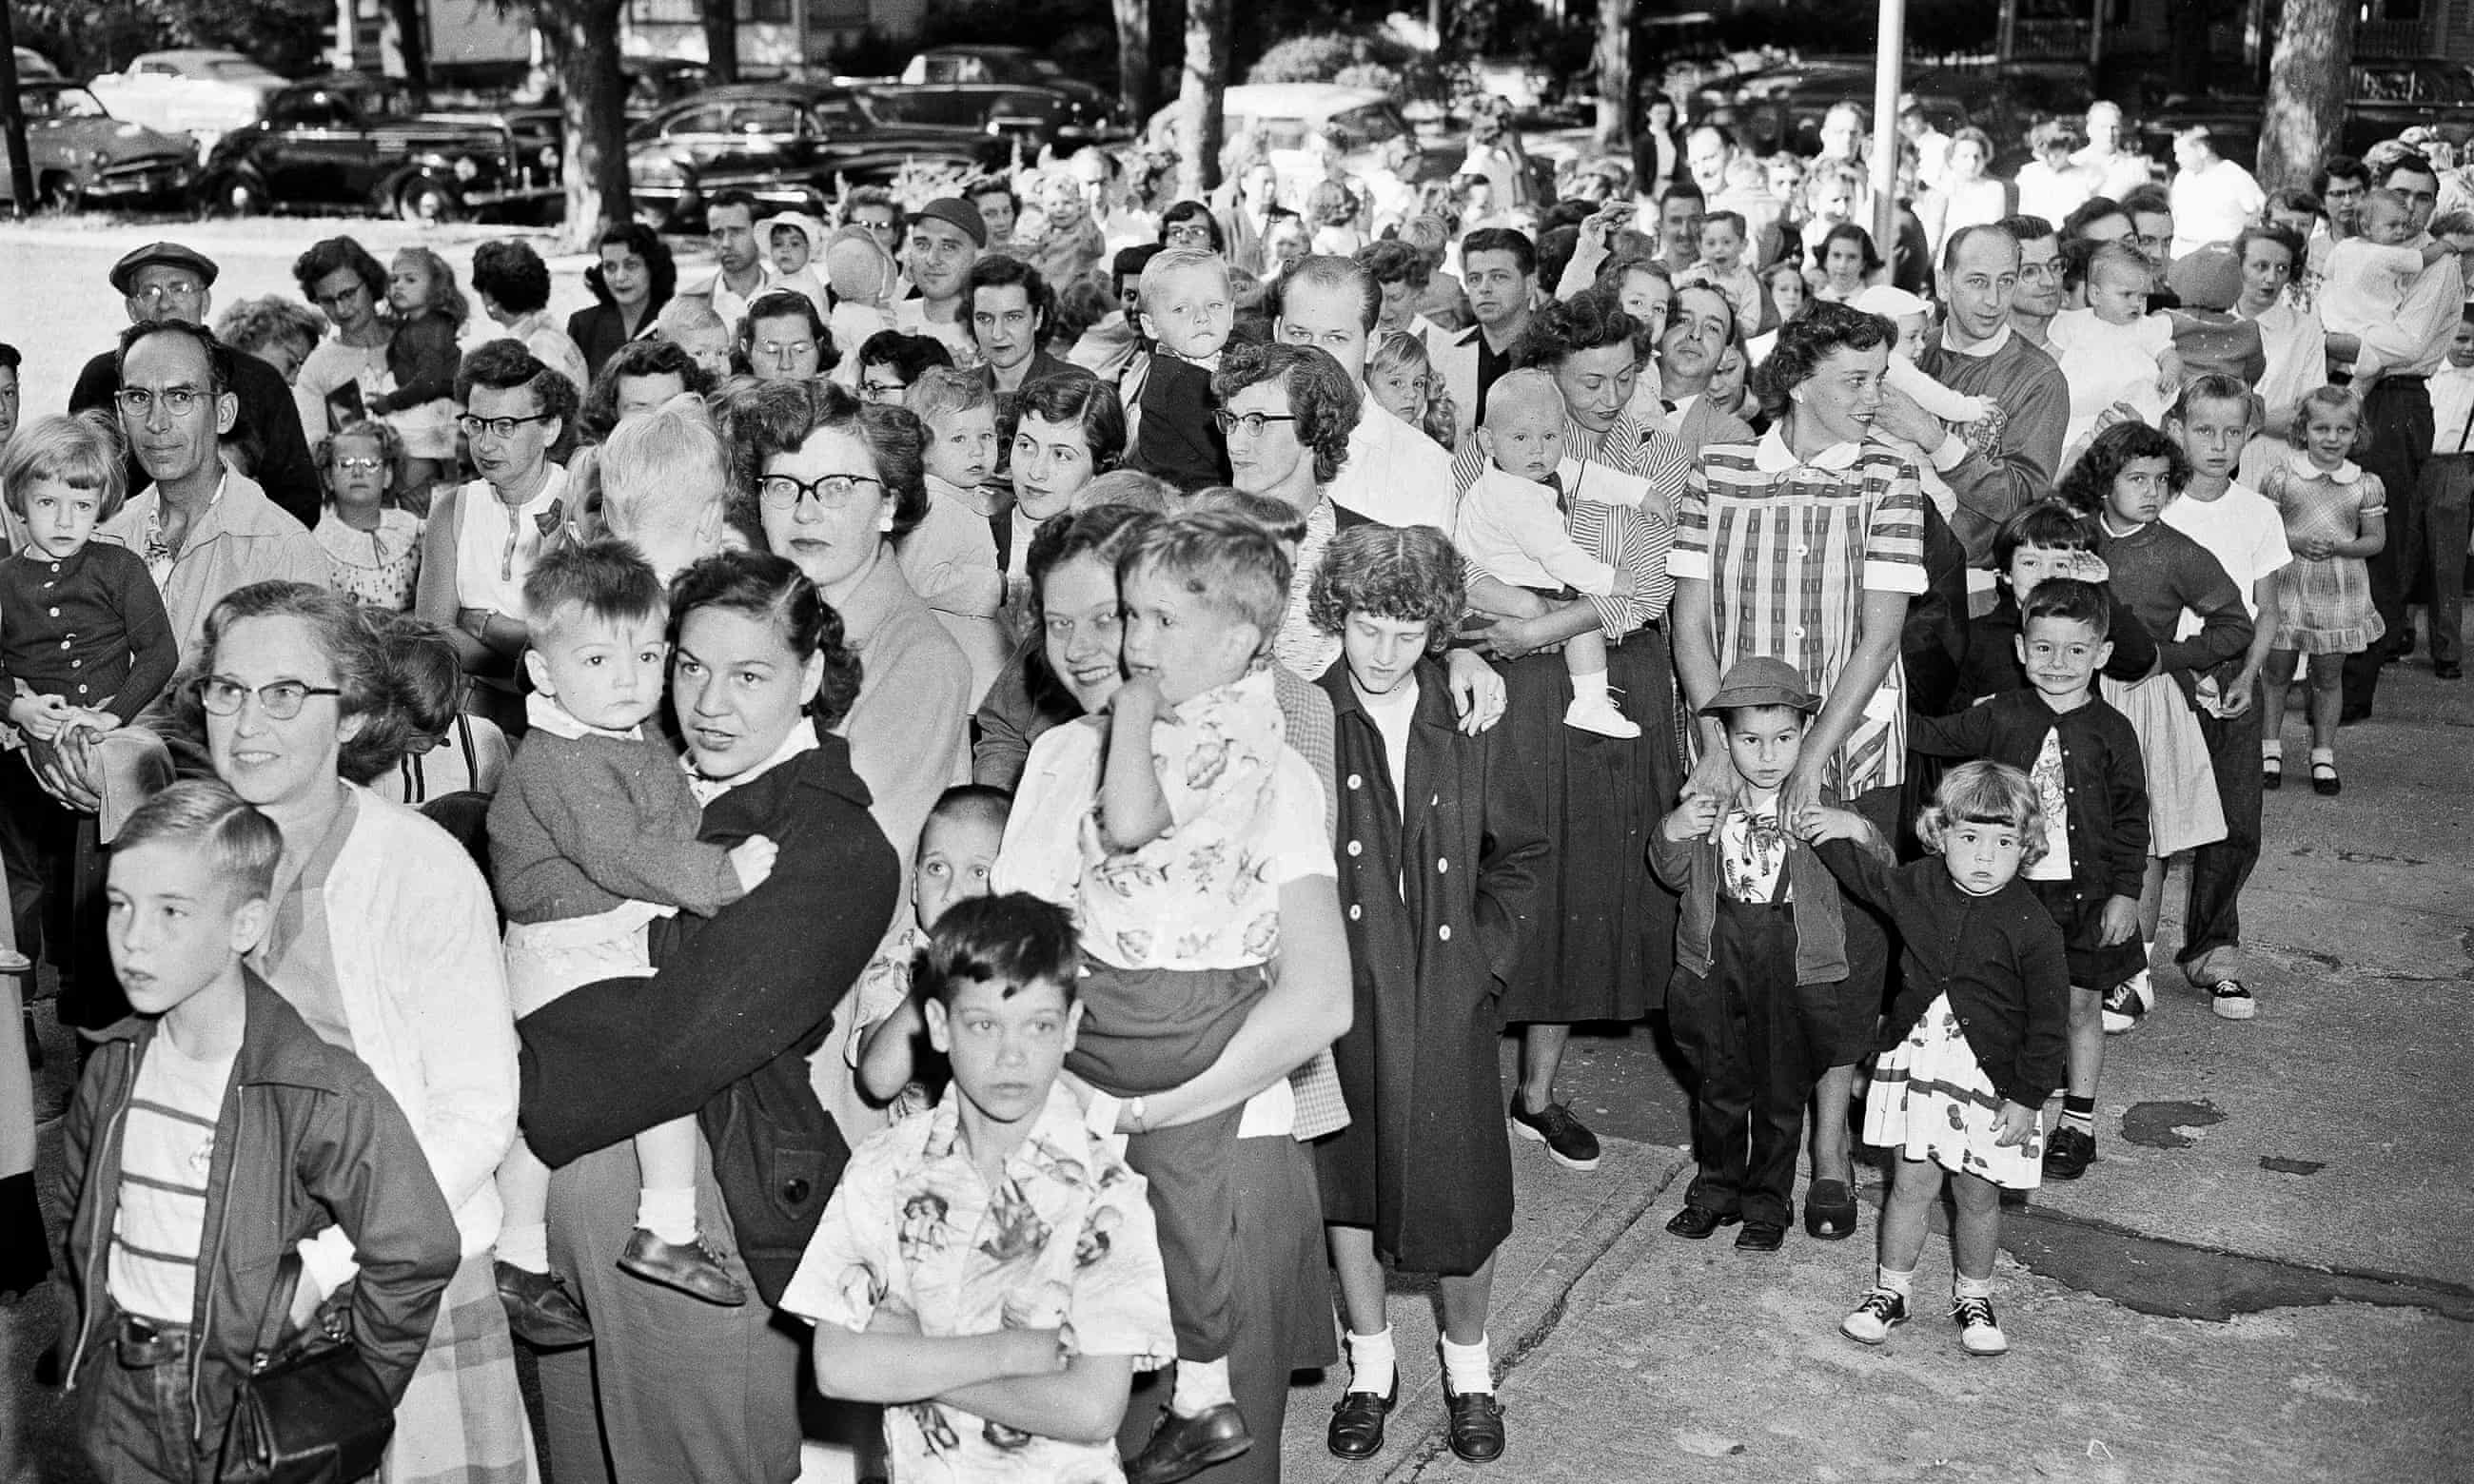 A mutated virus, anti-vaxxers and a vulnerable population: how polio returned to the US (theguardian.com)